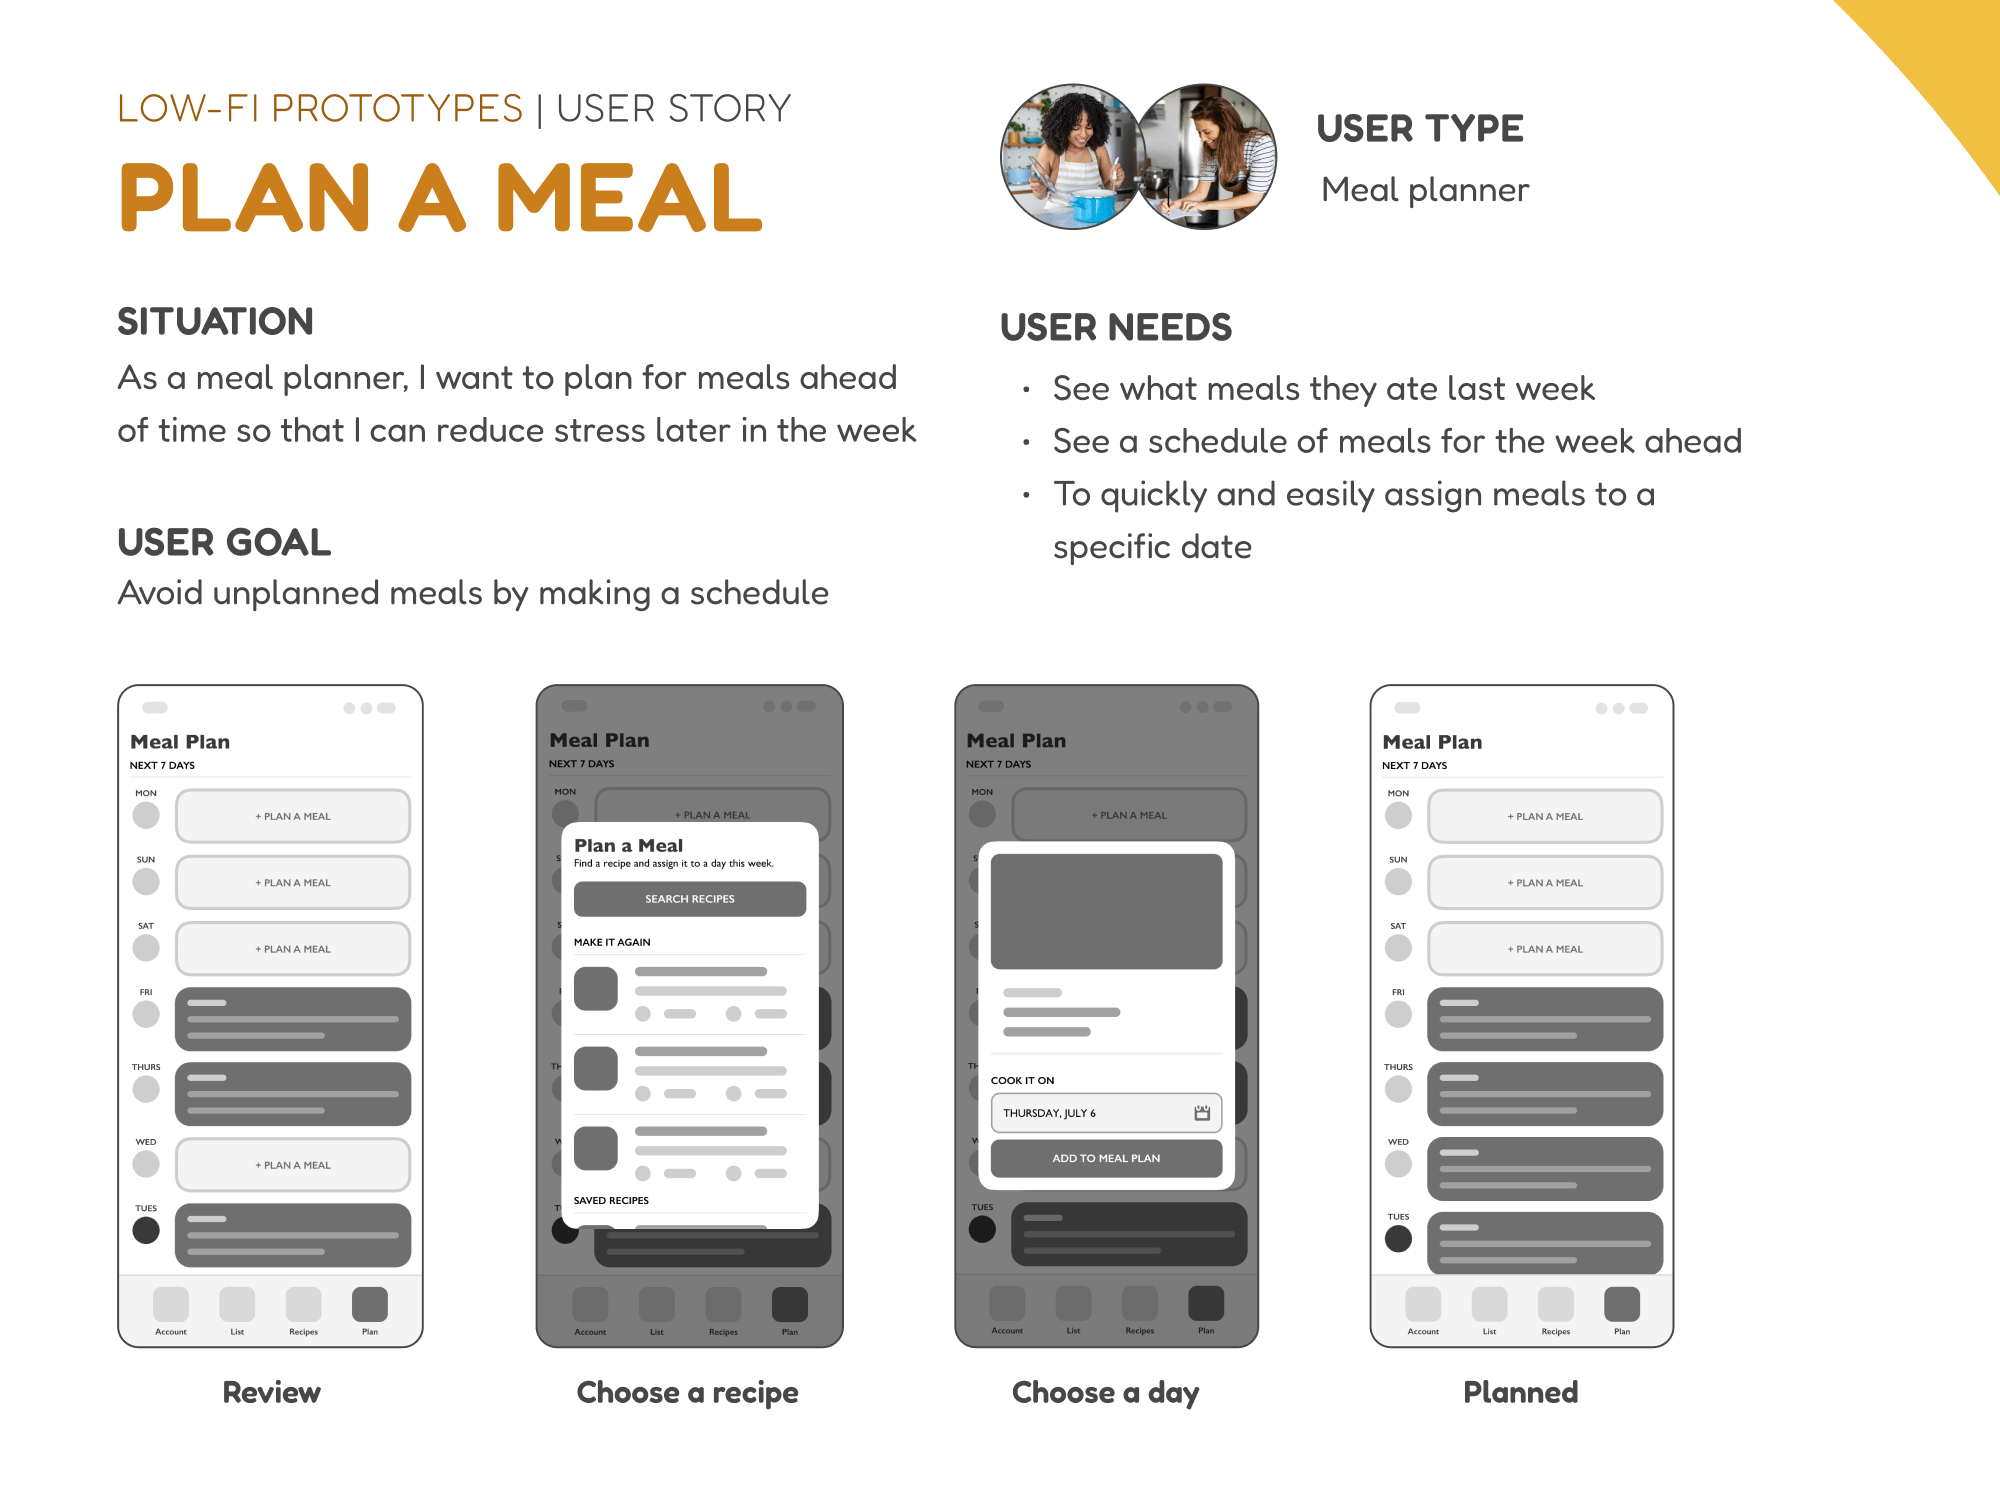 A user story for the meal planner to plan a meal. The situation is that meal planners want to plan meals ahead of time so that they can reduce stress later in the week.